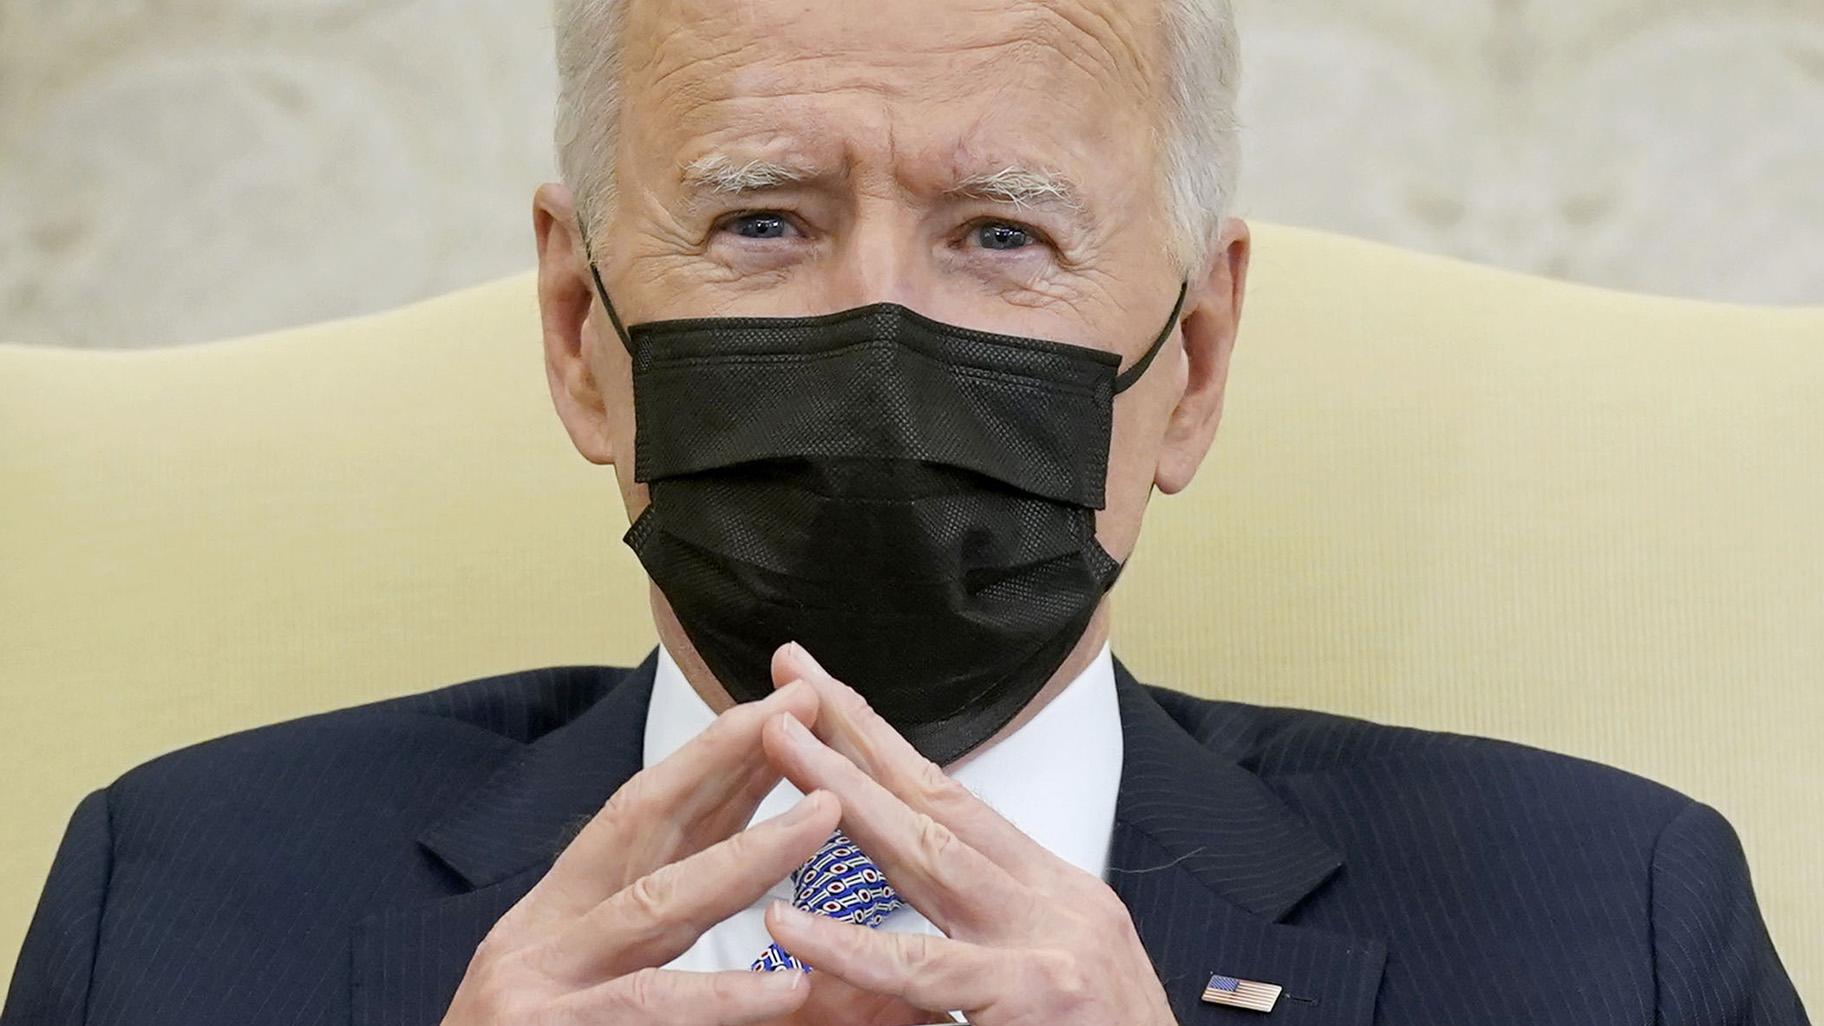 In this April 12, 2021, file photo President Joe Biden speaks during a meeting with lawmakers to discuss the American Jobs Plan in the Oval Office of the White House in Washington. (AP Photo / Patrick Semansky, File)